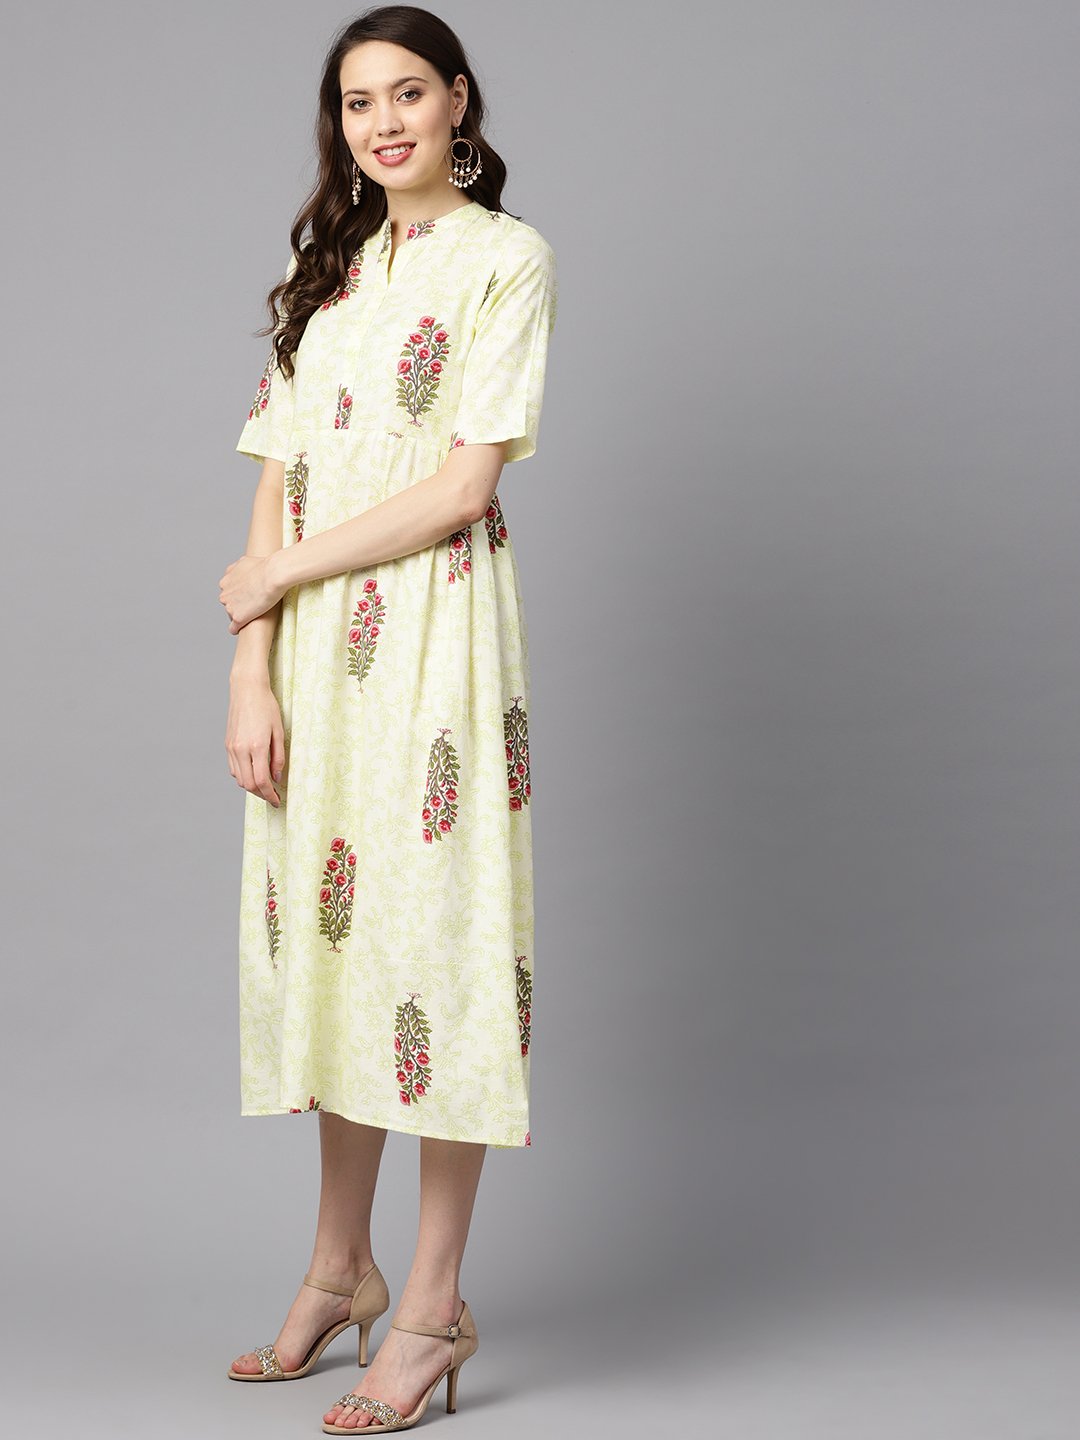 Women's Floral Printed Dress With Side Pleats - Nayo Clothing